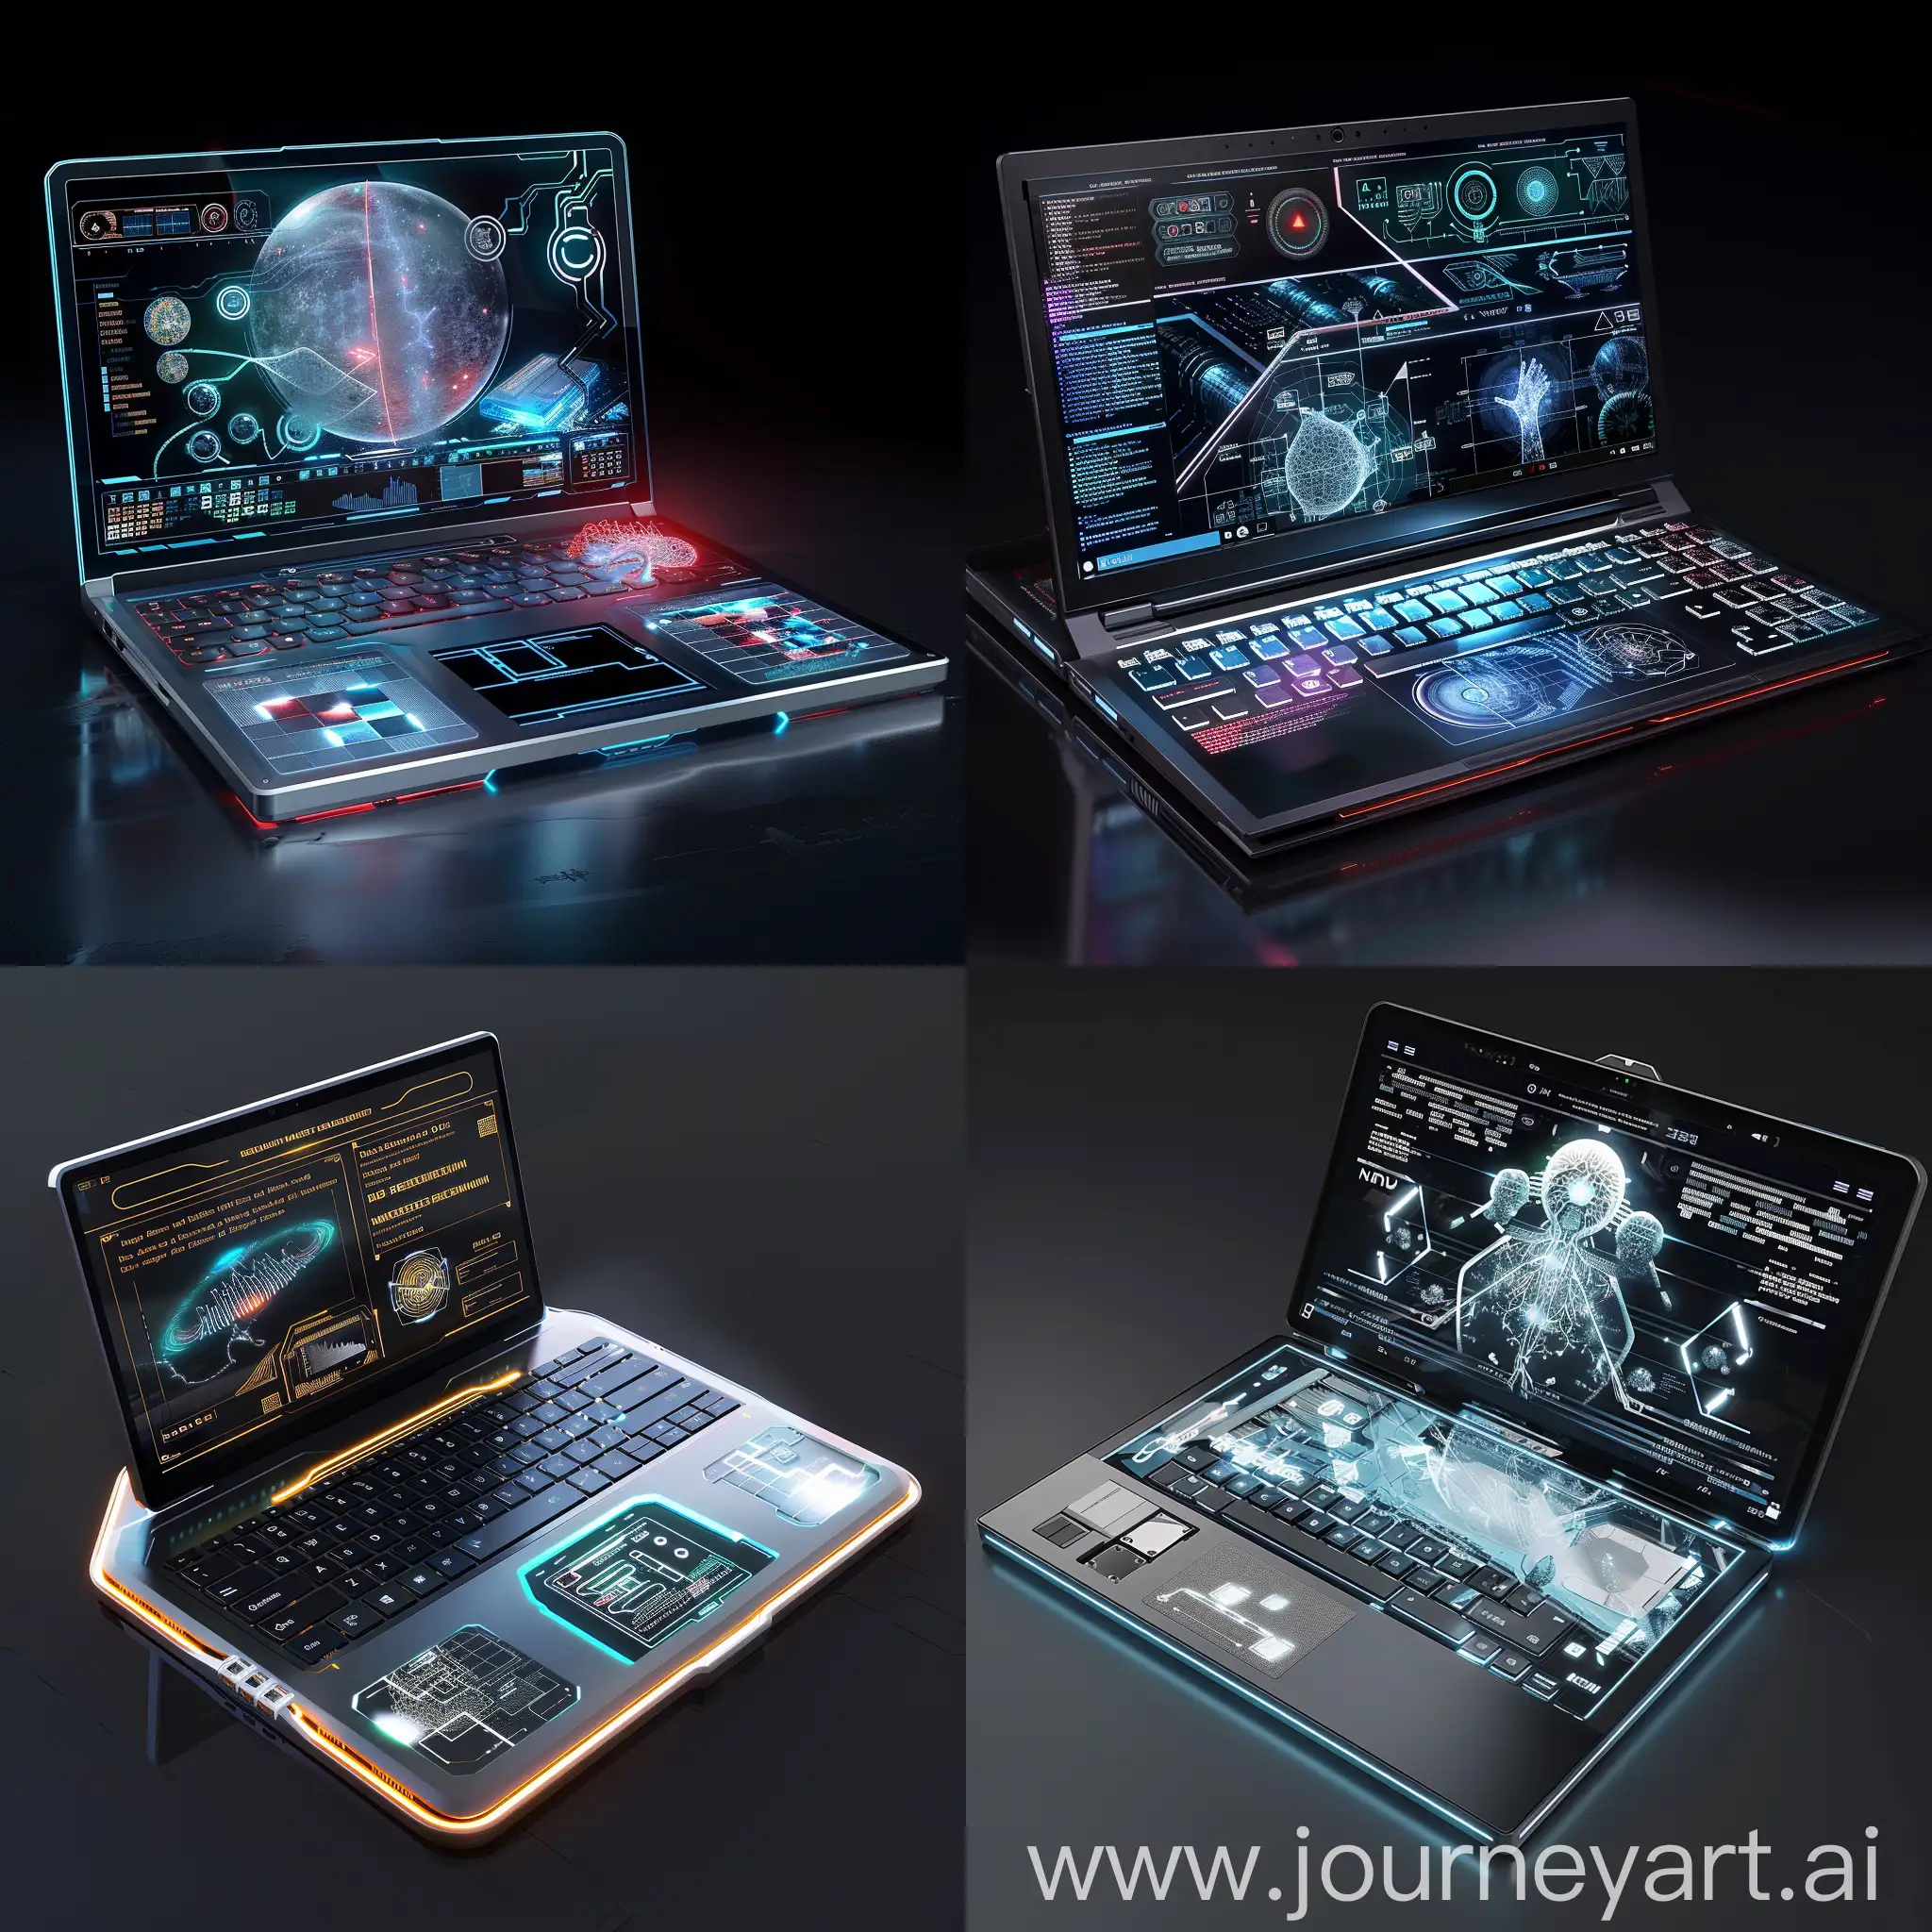 Futuristic laptop, in futuristic style. Quantum Processor, Neural Processing Unit (NPU), Graphene-based Batteries, Advanced Cooling System, Holographic Display, Biometric Authentication, Quantum Encryption, Modular Design, Wireless Charging, Self-healing Materials, Flexible OLED Display, Transparent Touchpad/Keyboard, Dynamic E-Ink Cover, Integrated Projector, Gesture Control Sensors, Adaptive Ergonomics, Advanced Connectivity Ports, Augmented Reality (AR) Cameras, Solar Panel Integration, Dynamic Light Patterns, Hyper-Resolution Display, Neural-Rendering Graphics Card, Haptic Feedback System, 3D Spatial Audio Processor, Eye-Tracking Sensors, Biometric Feedback Sensors, Quantum Neural Processor, Hyper-Realistic Rendering Engine, Dynamic Environmental Sensors, Biofeedback Integration, Holographic Projector, Dynamic Ambient Lighting, Tactile Feedback Surface, Multisensory Haptic Feedback, Interactive Augmented Reality (AR) Cameras, Dynamic Emissive Display, Biometric Feedback Sensors, Environmental Sensors, Customizable Modular Accessories, Immersive Audio System, unreal engine 5 --stylize 1000